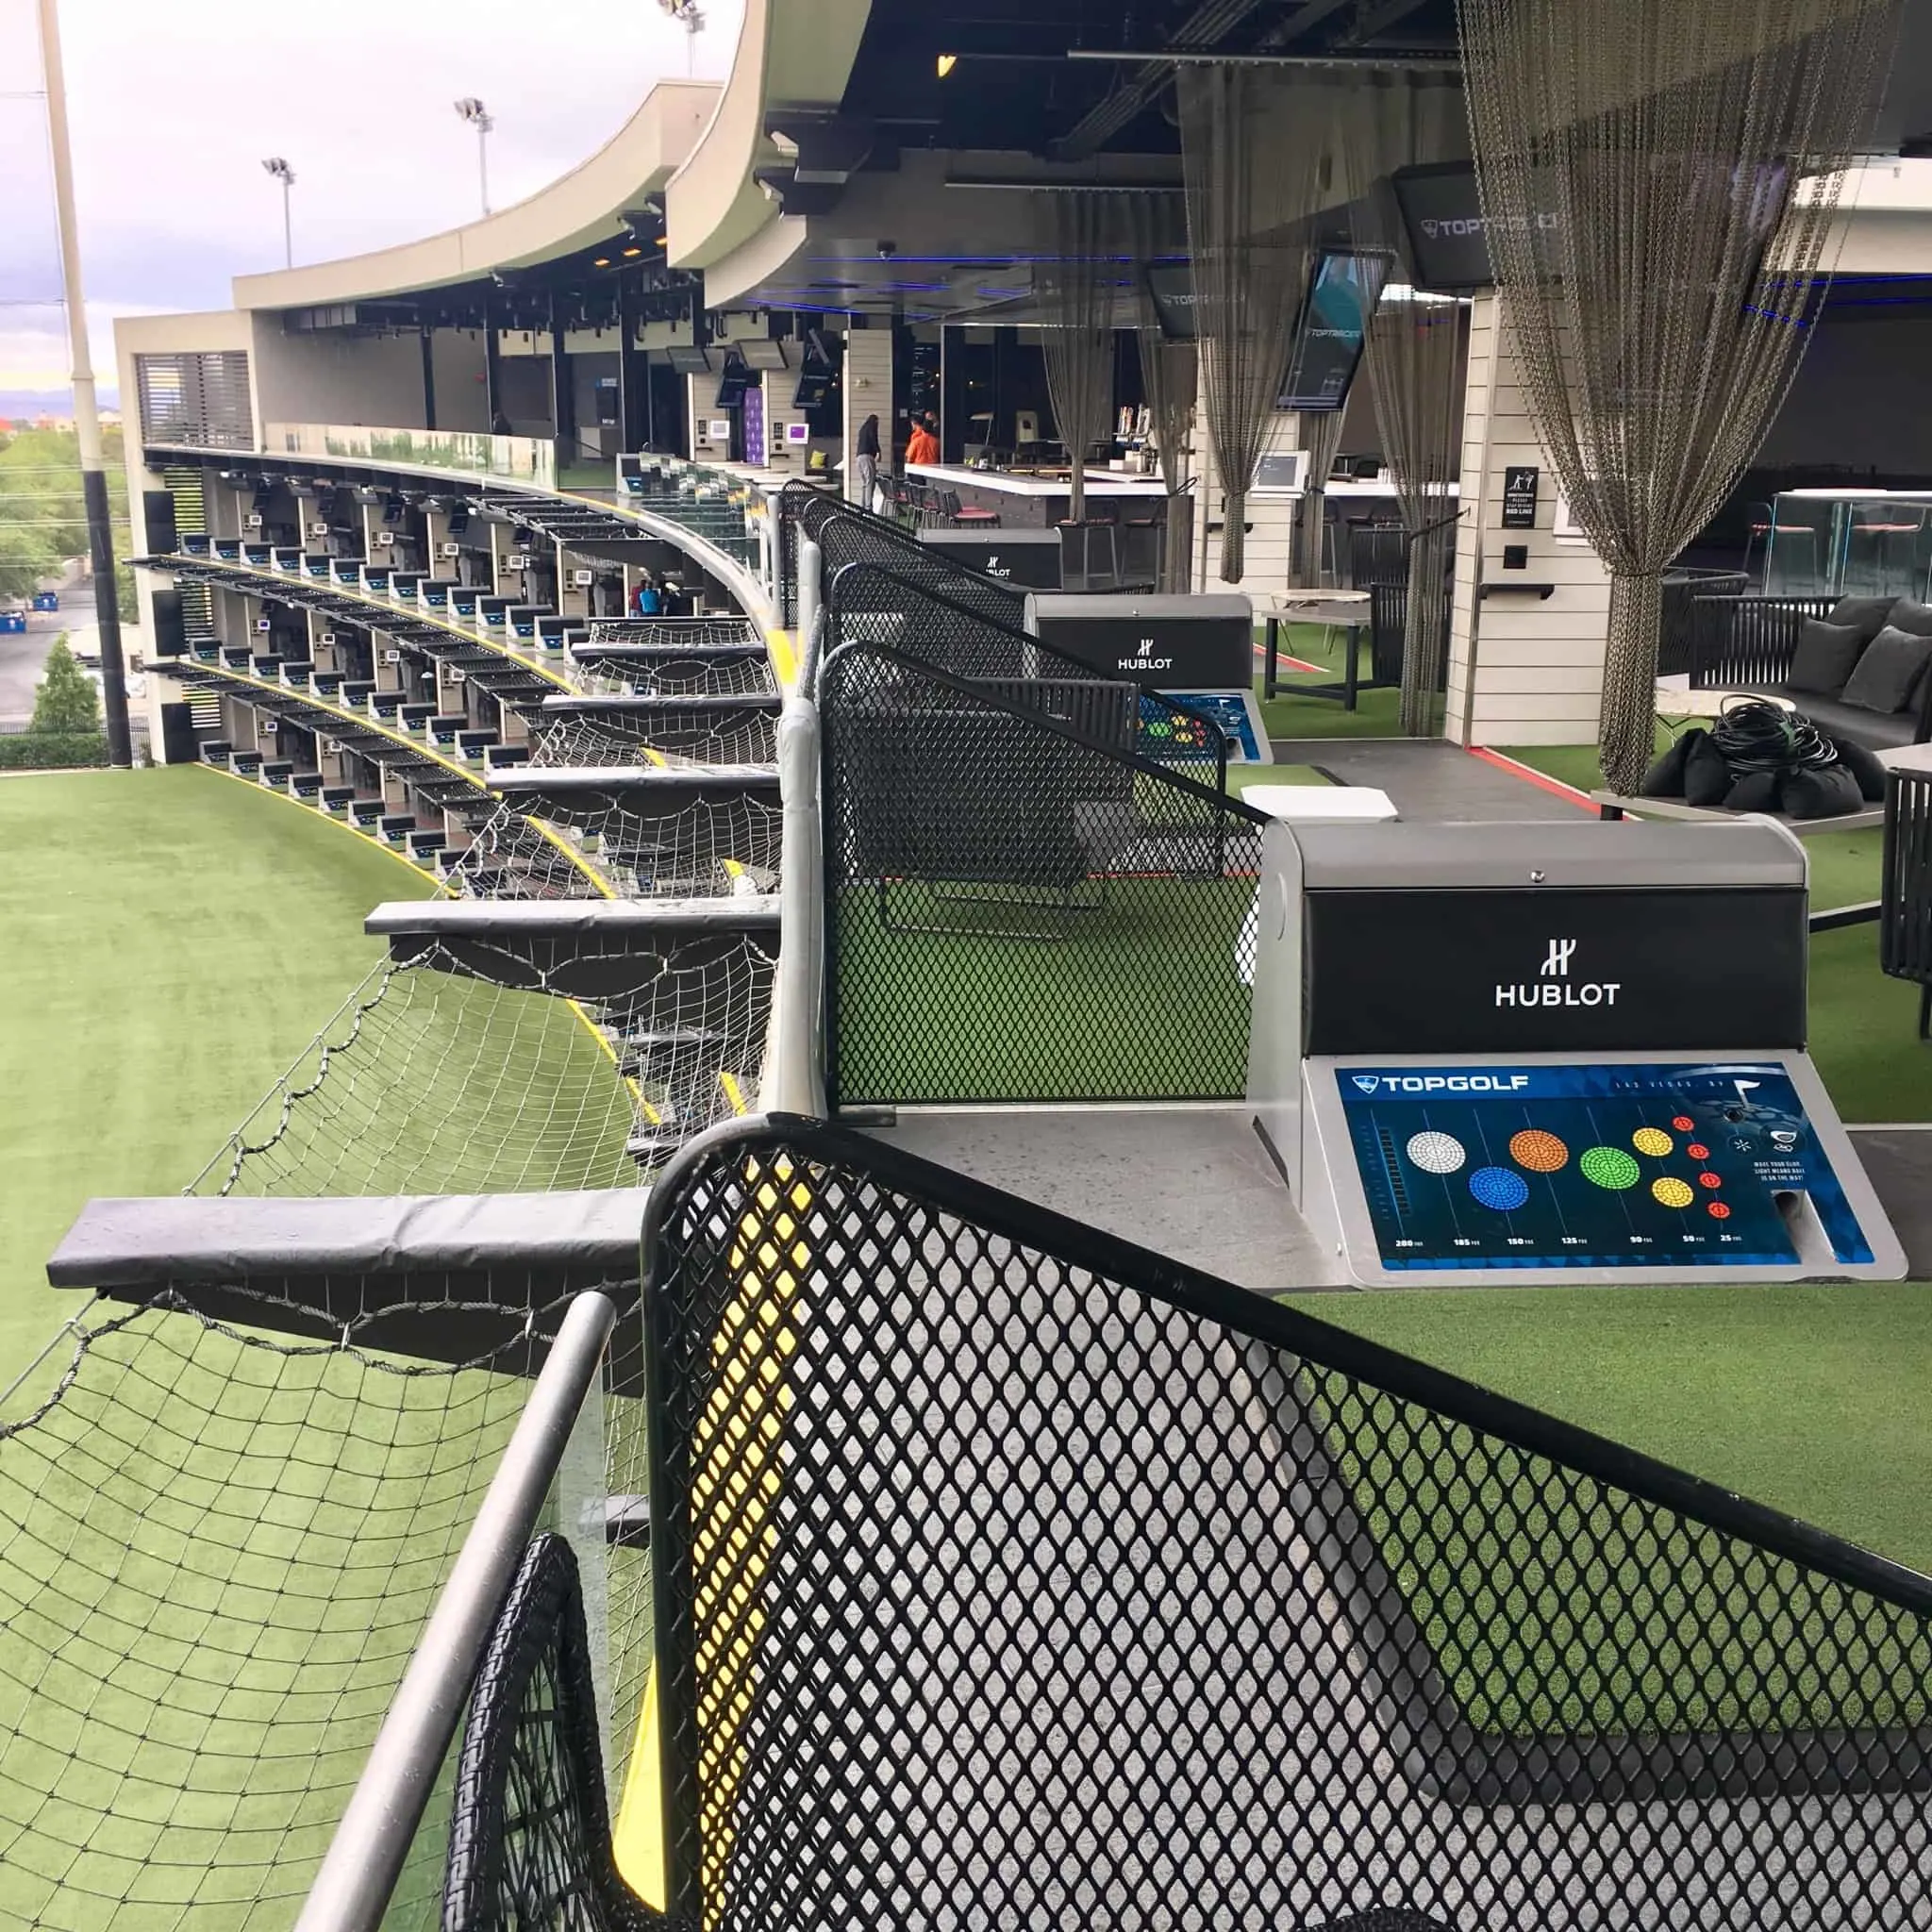 A typical hitting bay at Topgolf